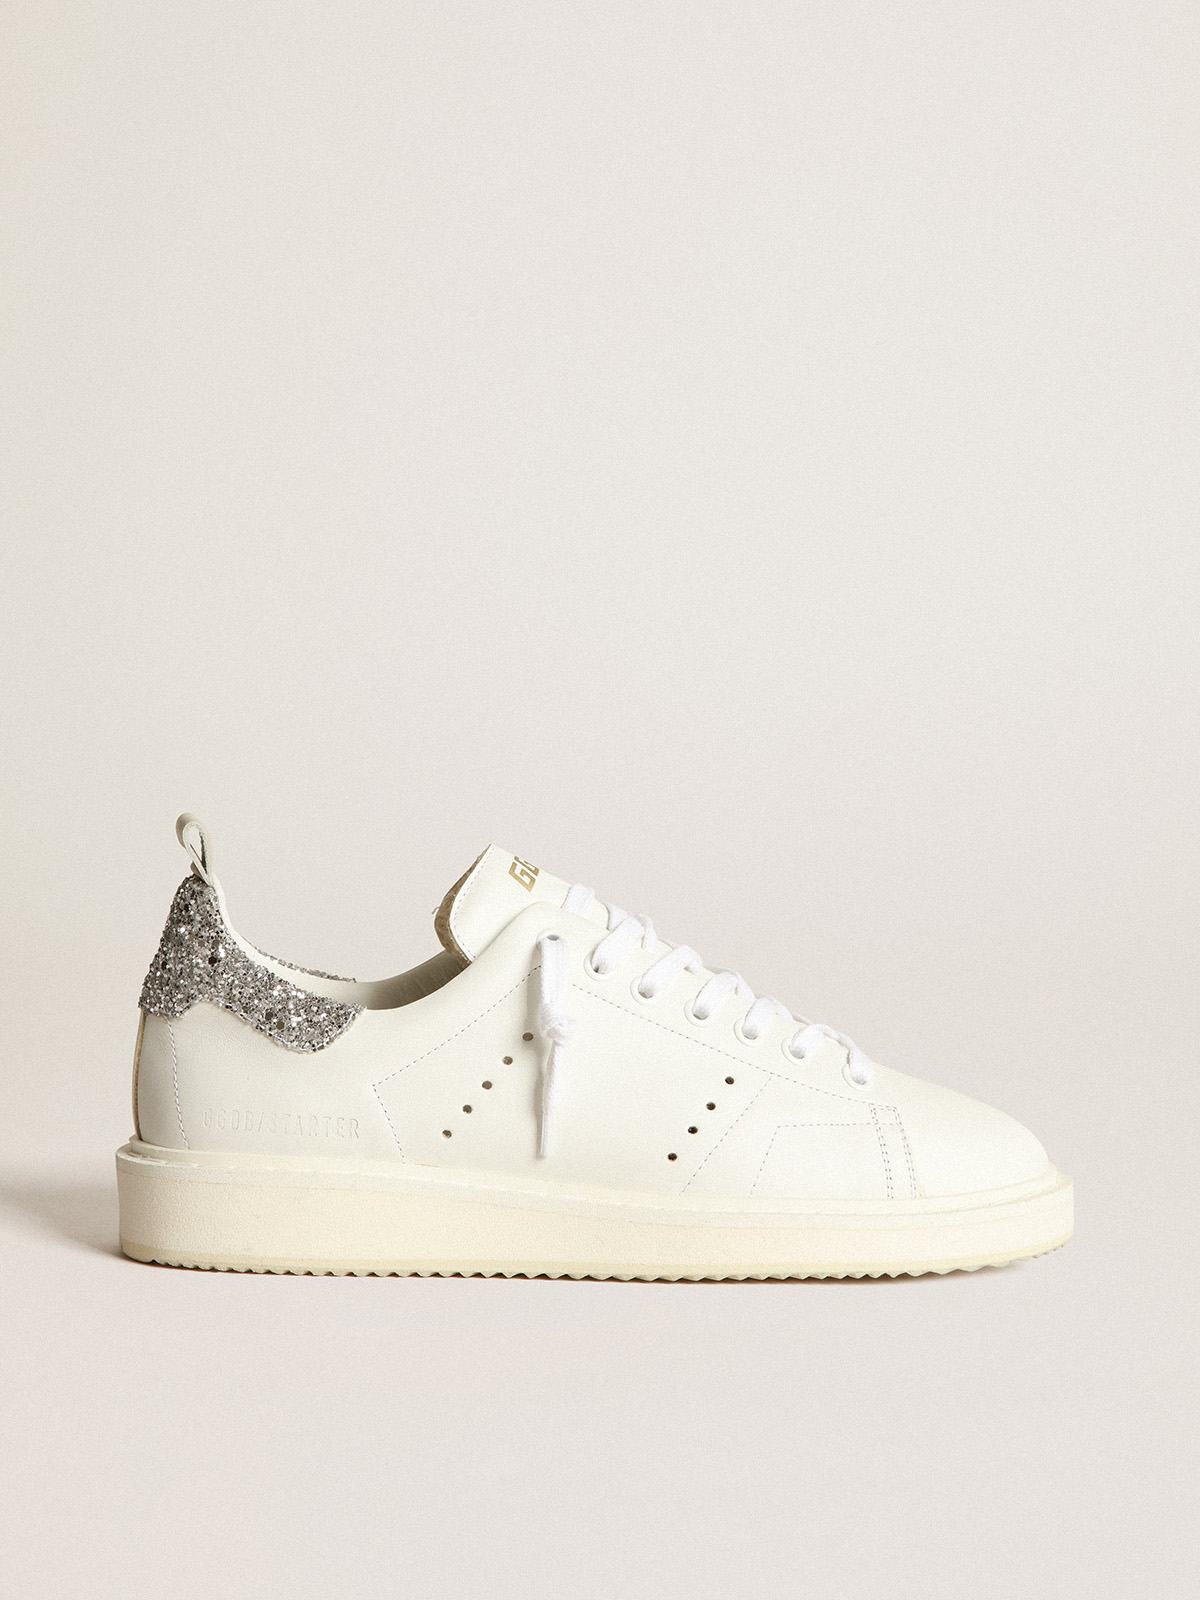 Starter sneakers in white leather with silver glitter heel tab | Golden  Goose